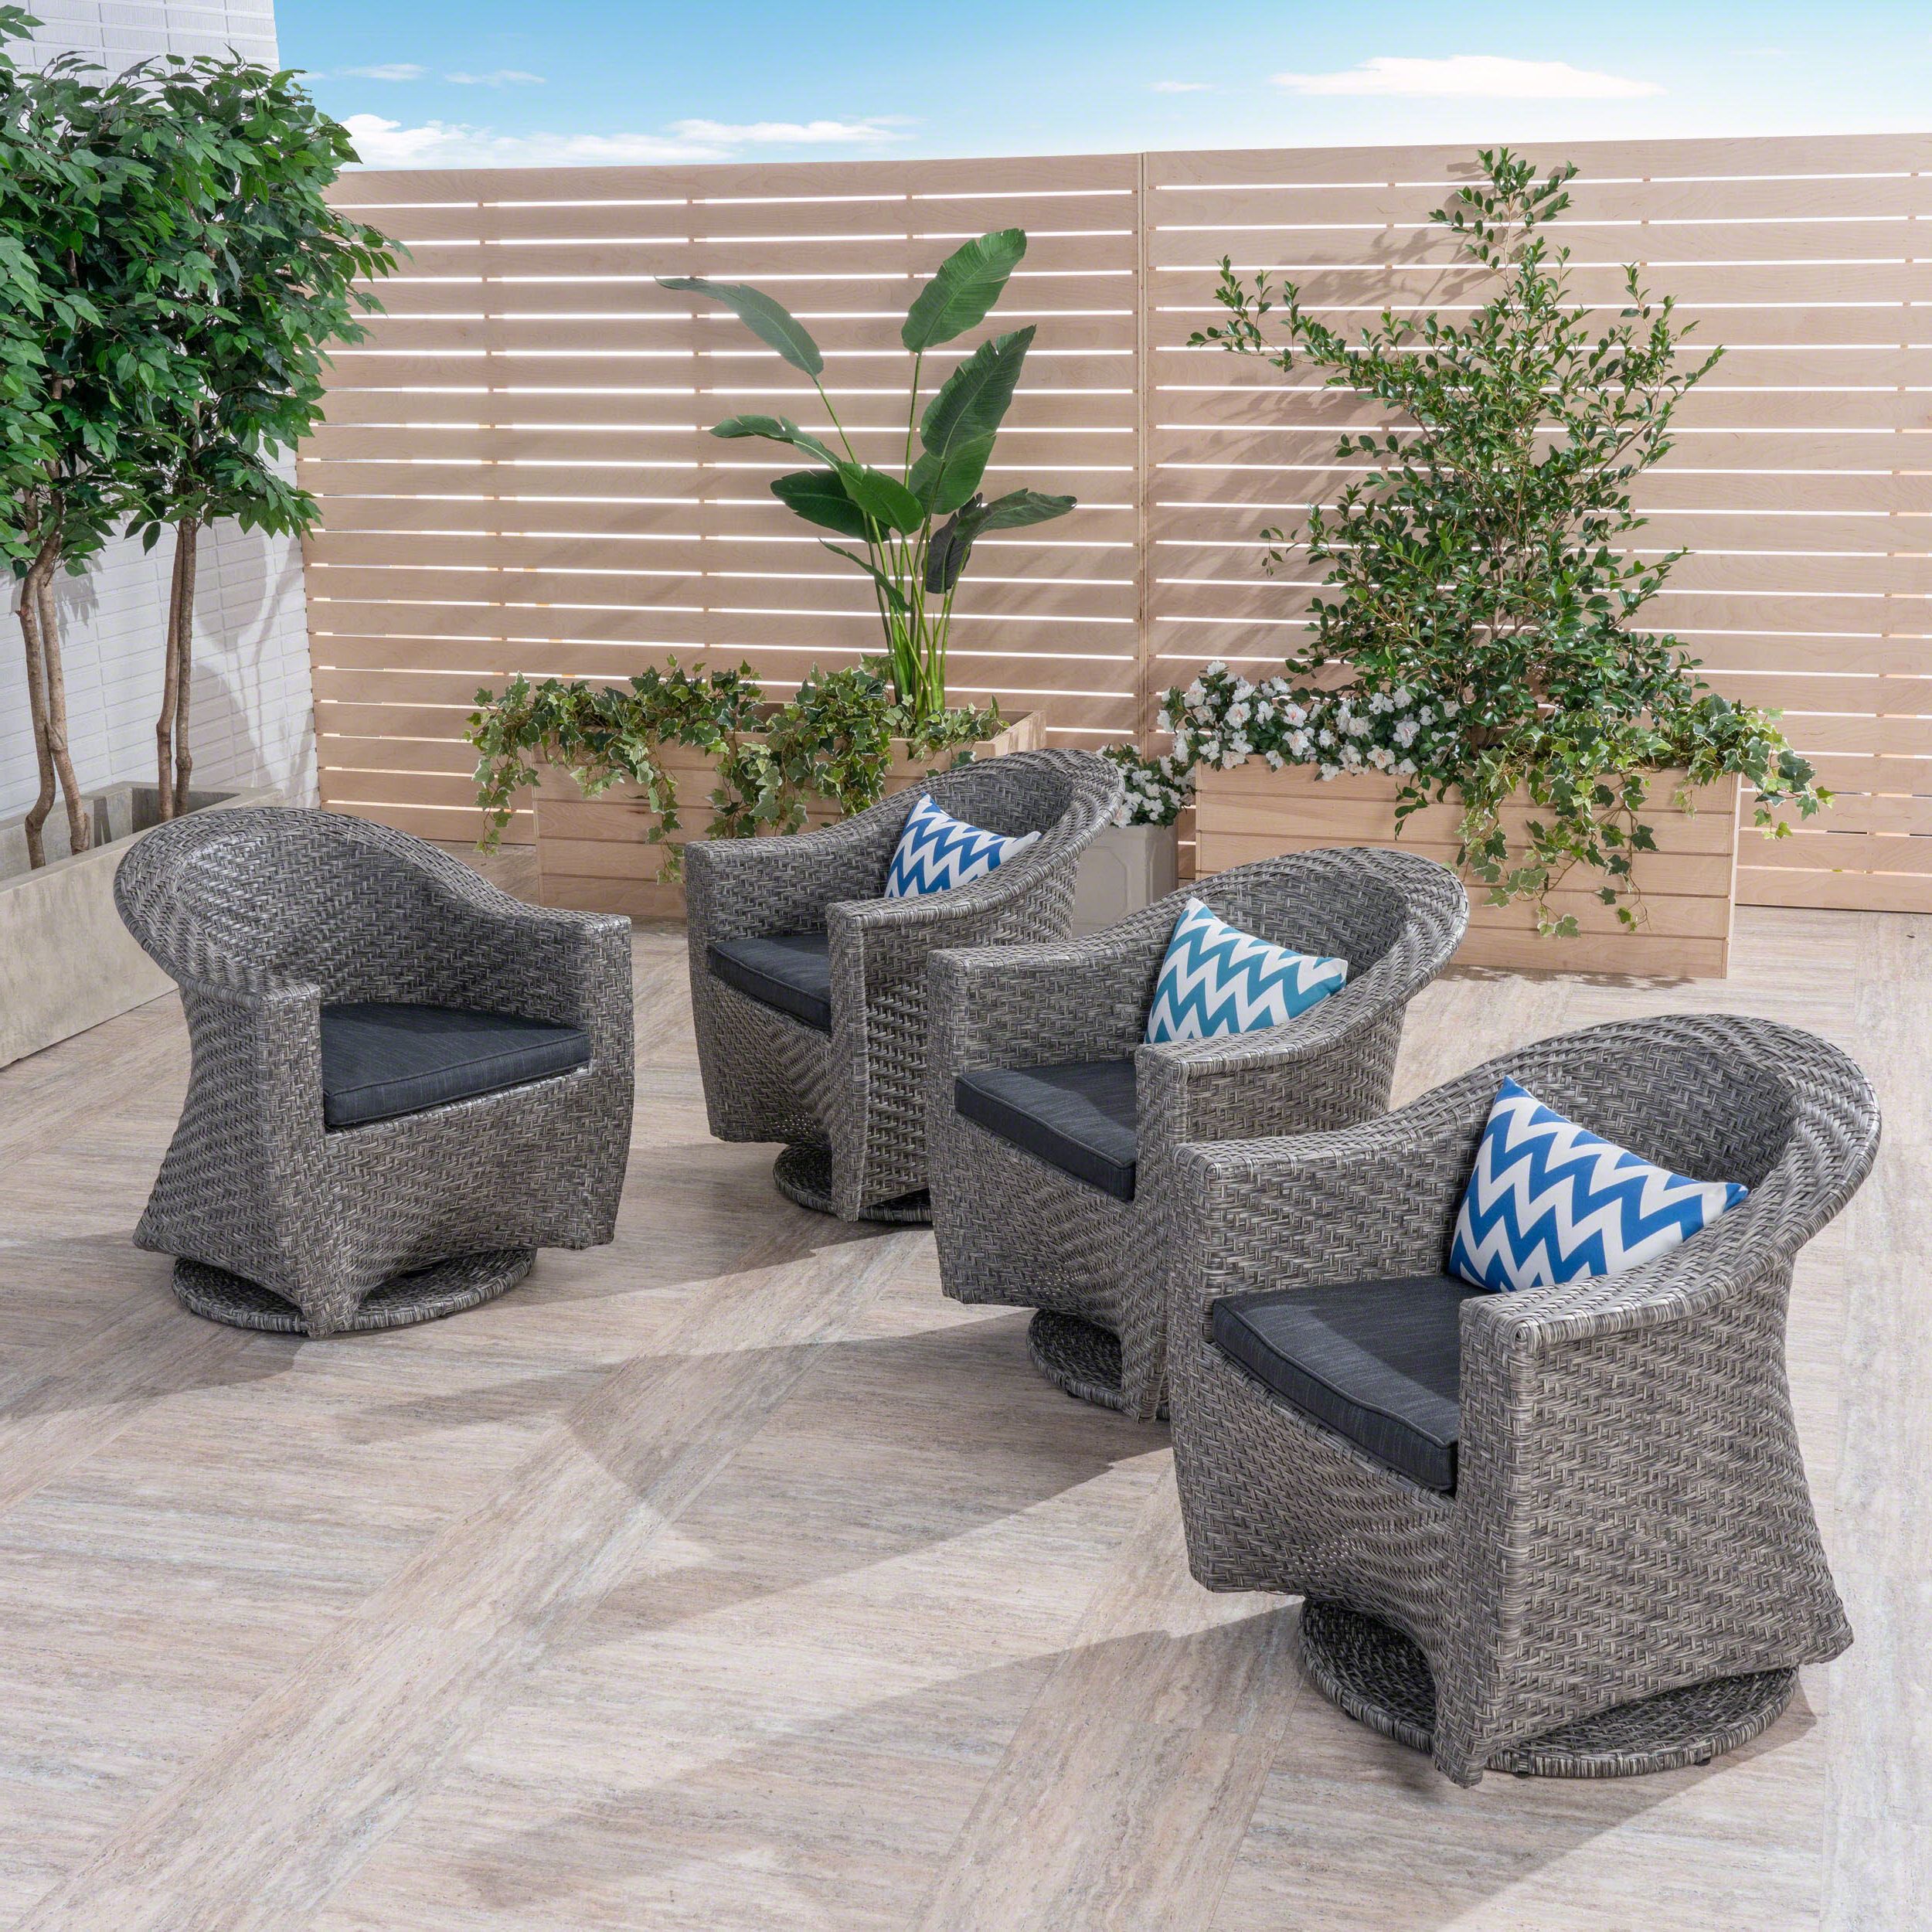 Newest Rattan Wicker Outdoor Seating Sets Throughout Mackenzie Outdoor Swivel Wicker Chairs With Cushions, Set Of 4, Mixed (View 3 of 15)